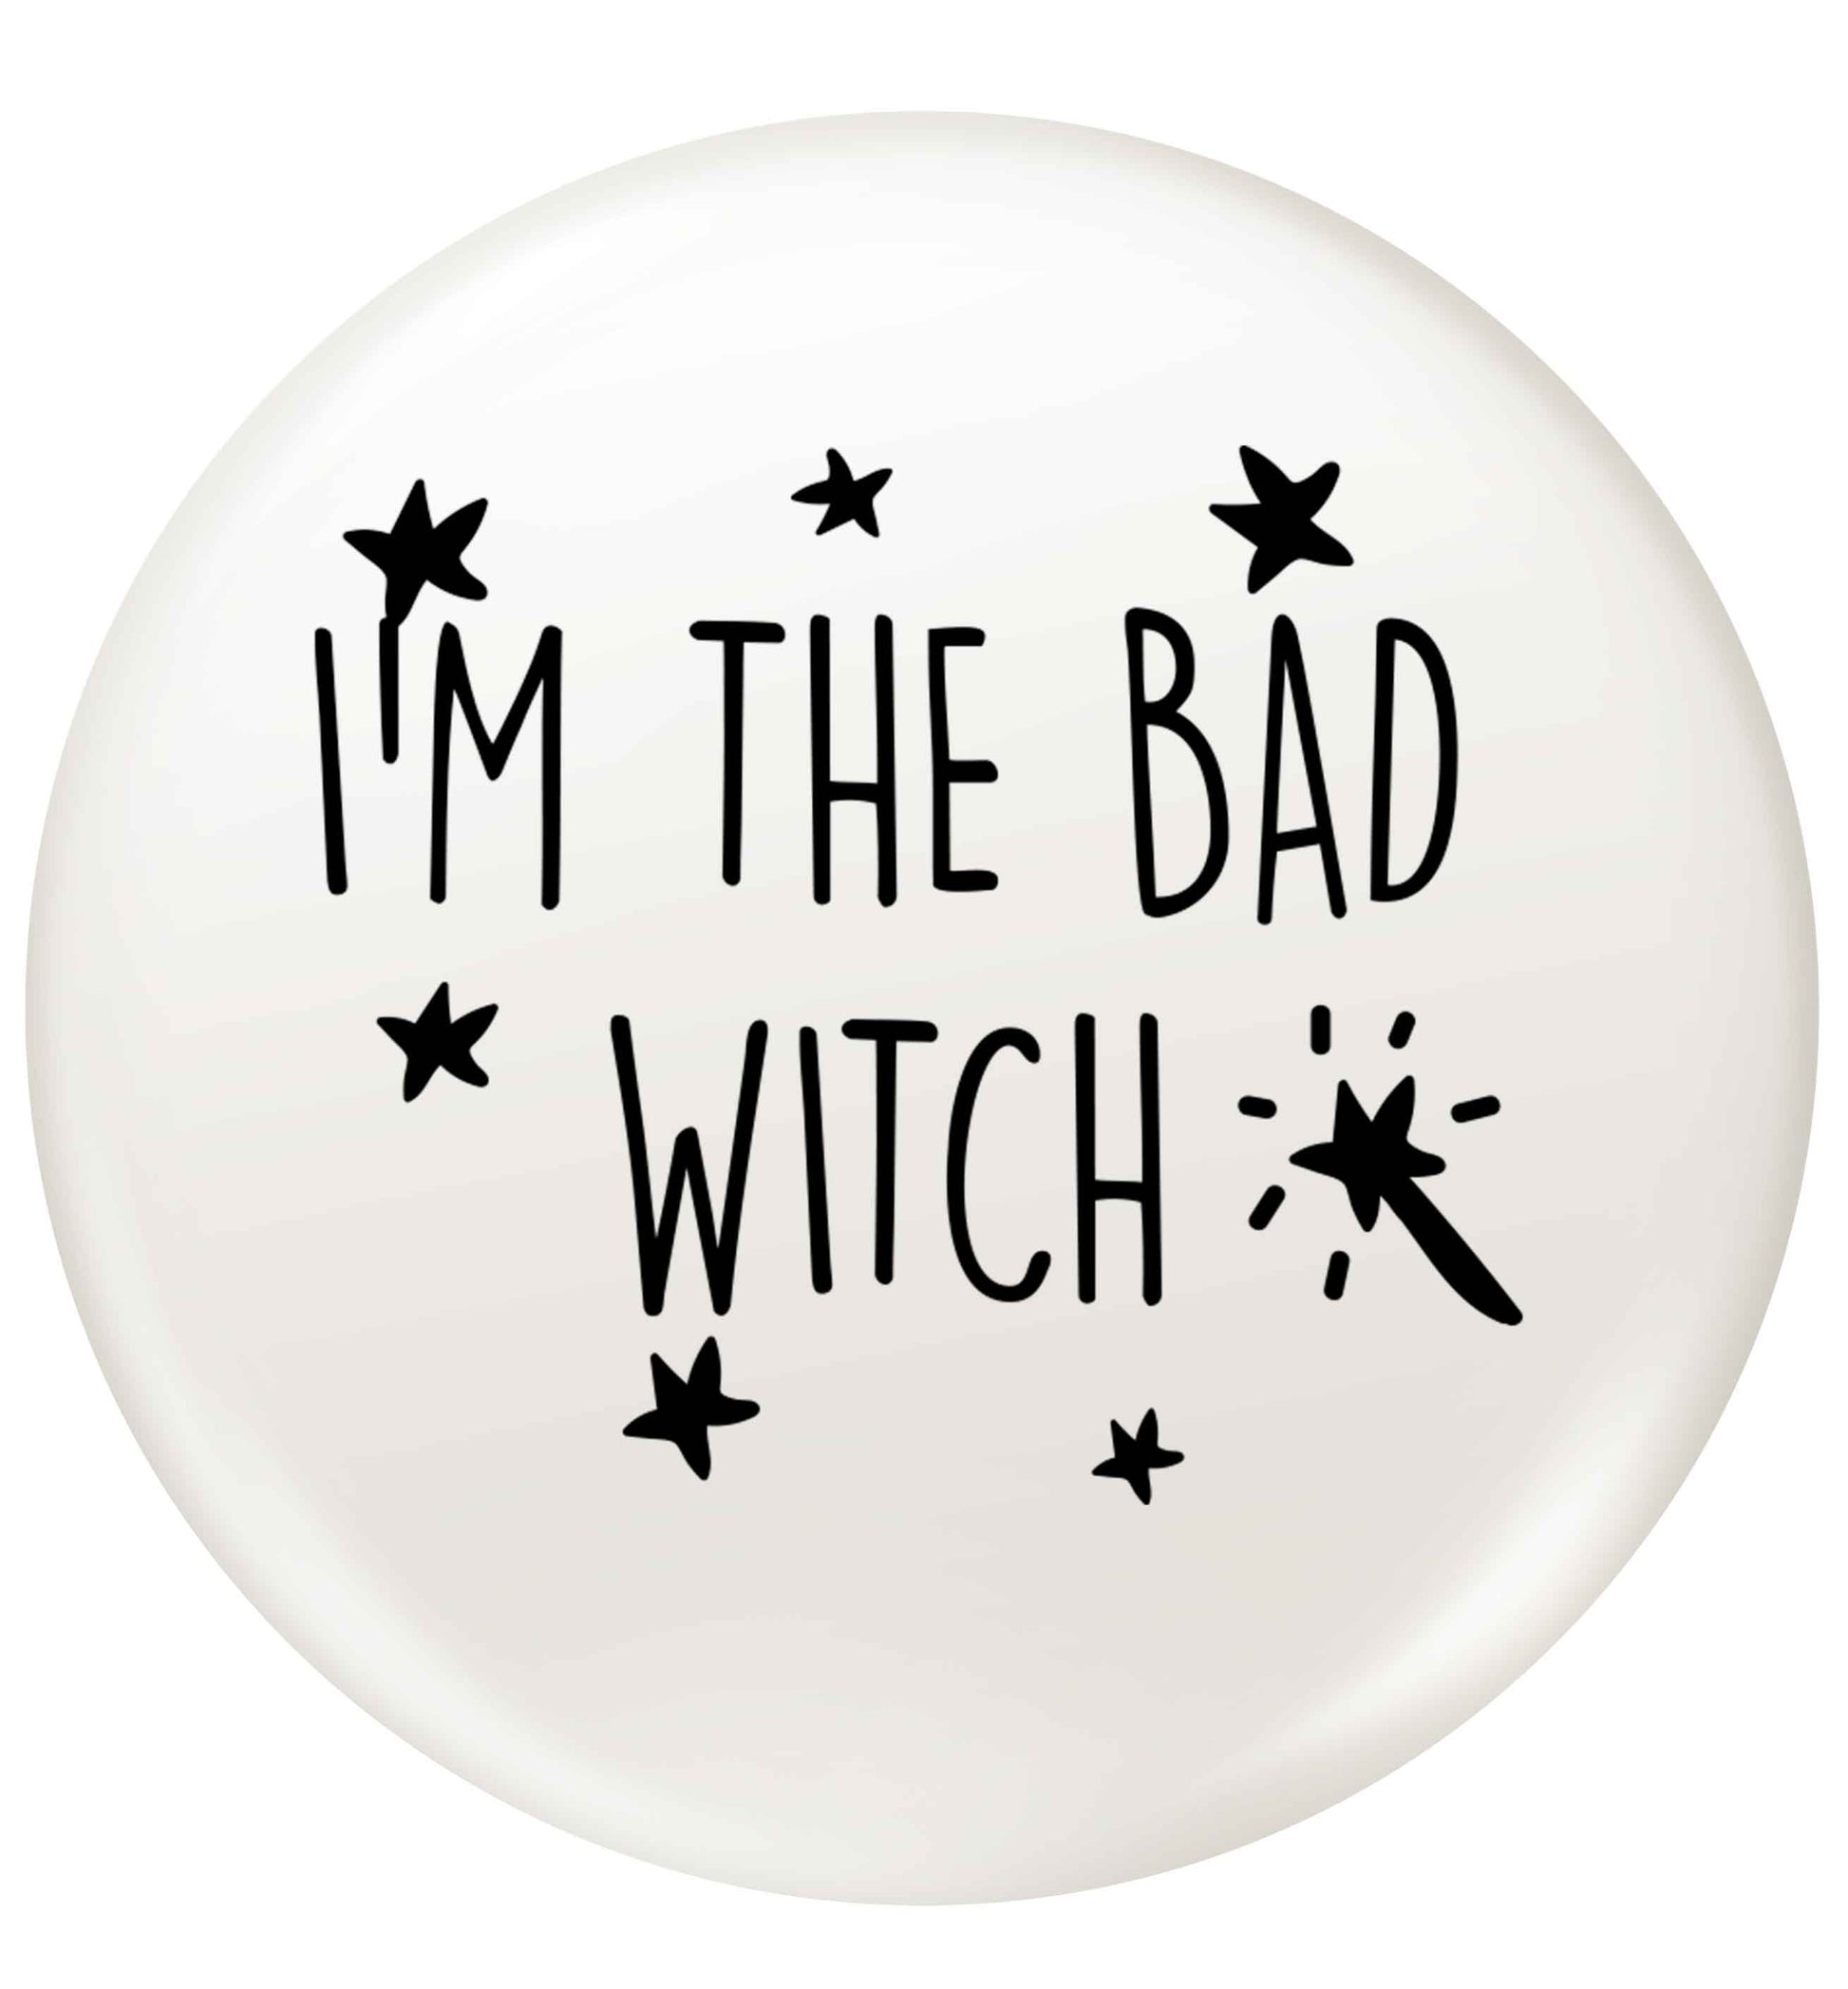 Bad witch small 25mm Pin badge